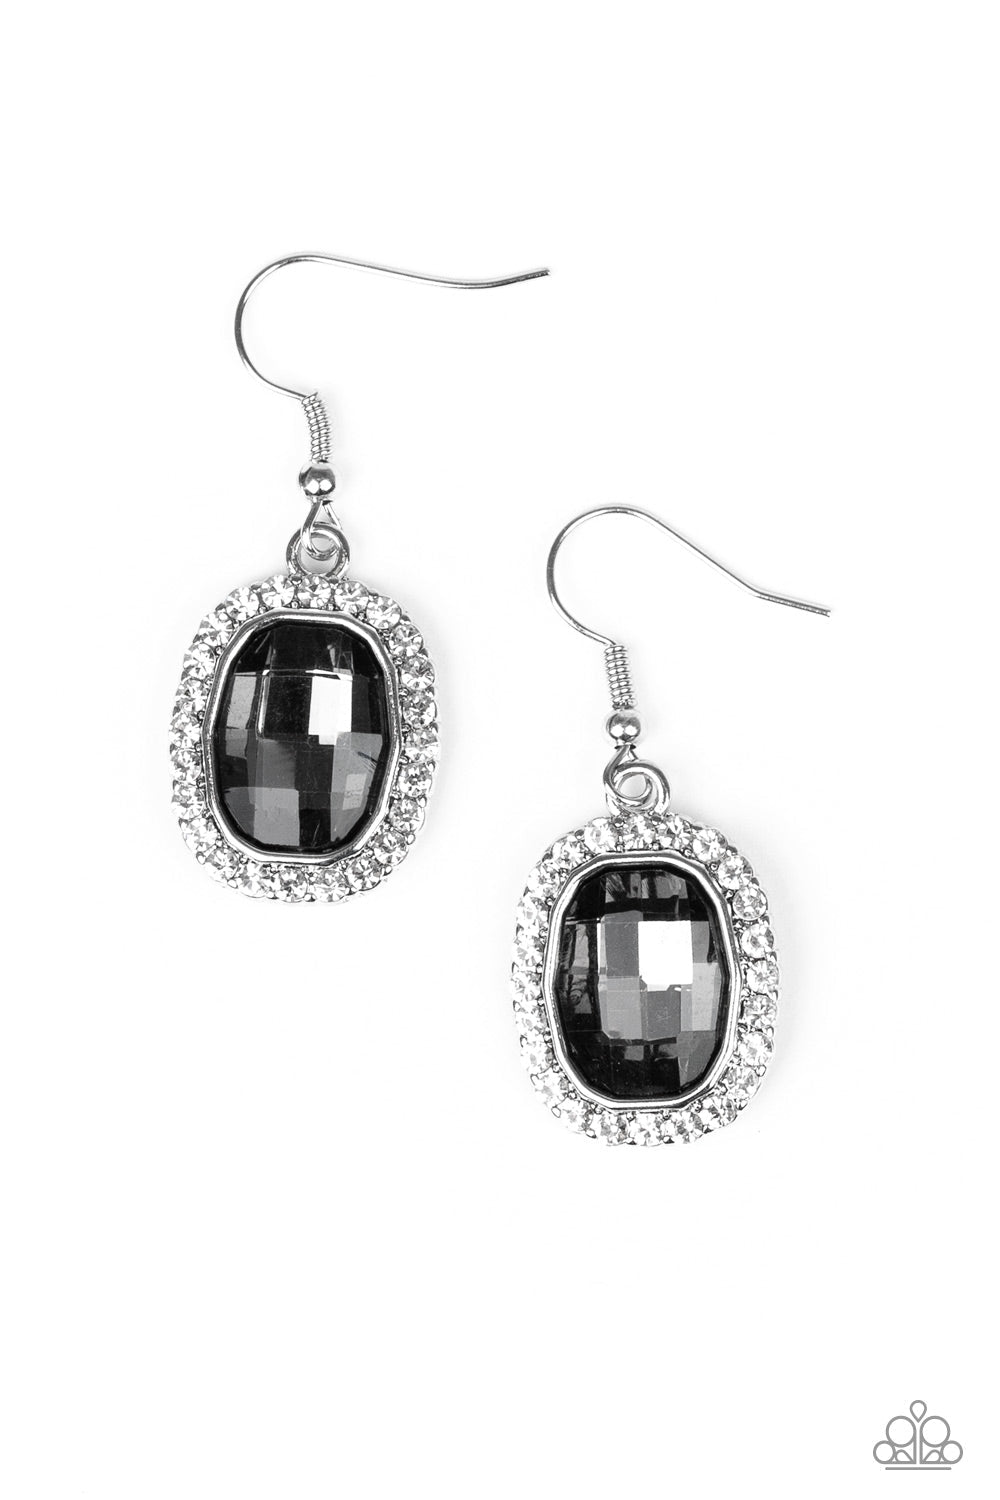 The Modern Monroe - Silver and Smoky Gem Earrings - Paparazzi Accessories -  A smoky gem is pressed into a shimmery silver frame radiating with glassy white rhinestones for a timeless fashion. Earring attaches to a standard fishhook fitting. 